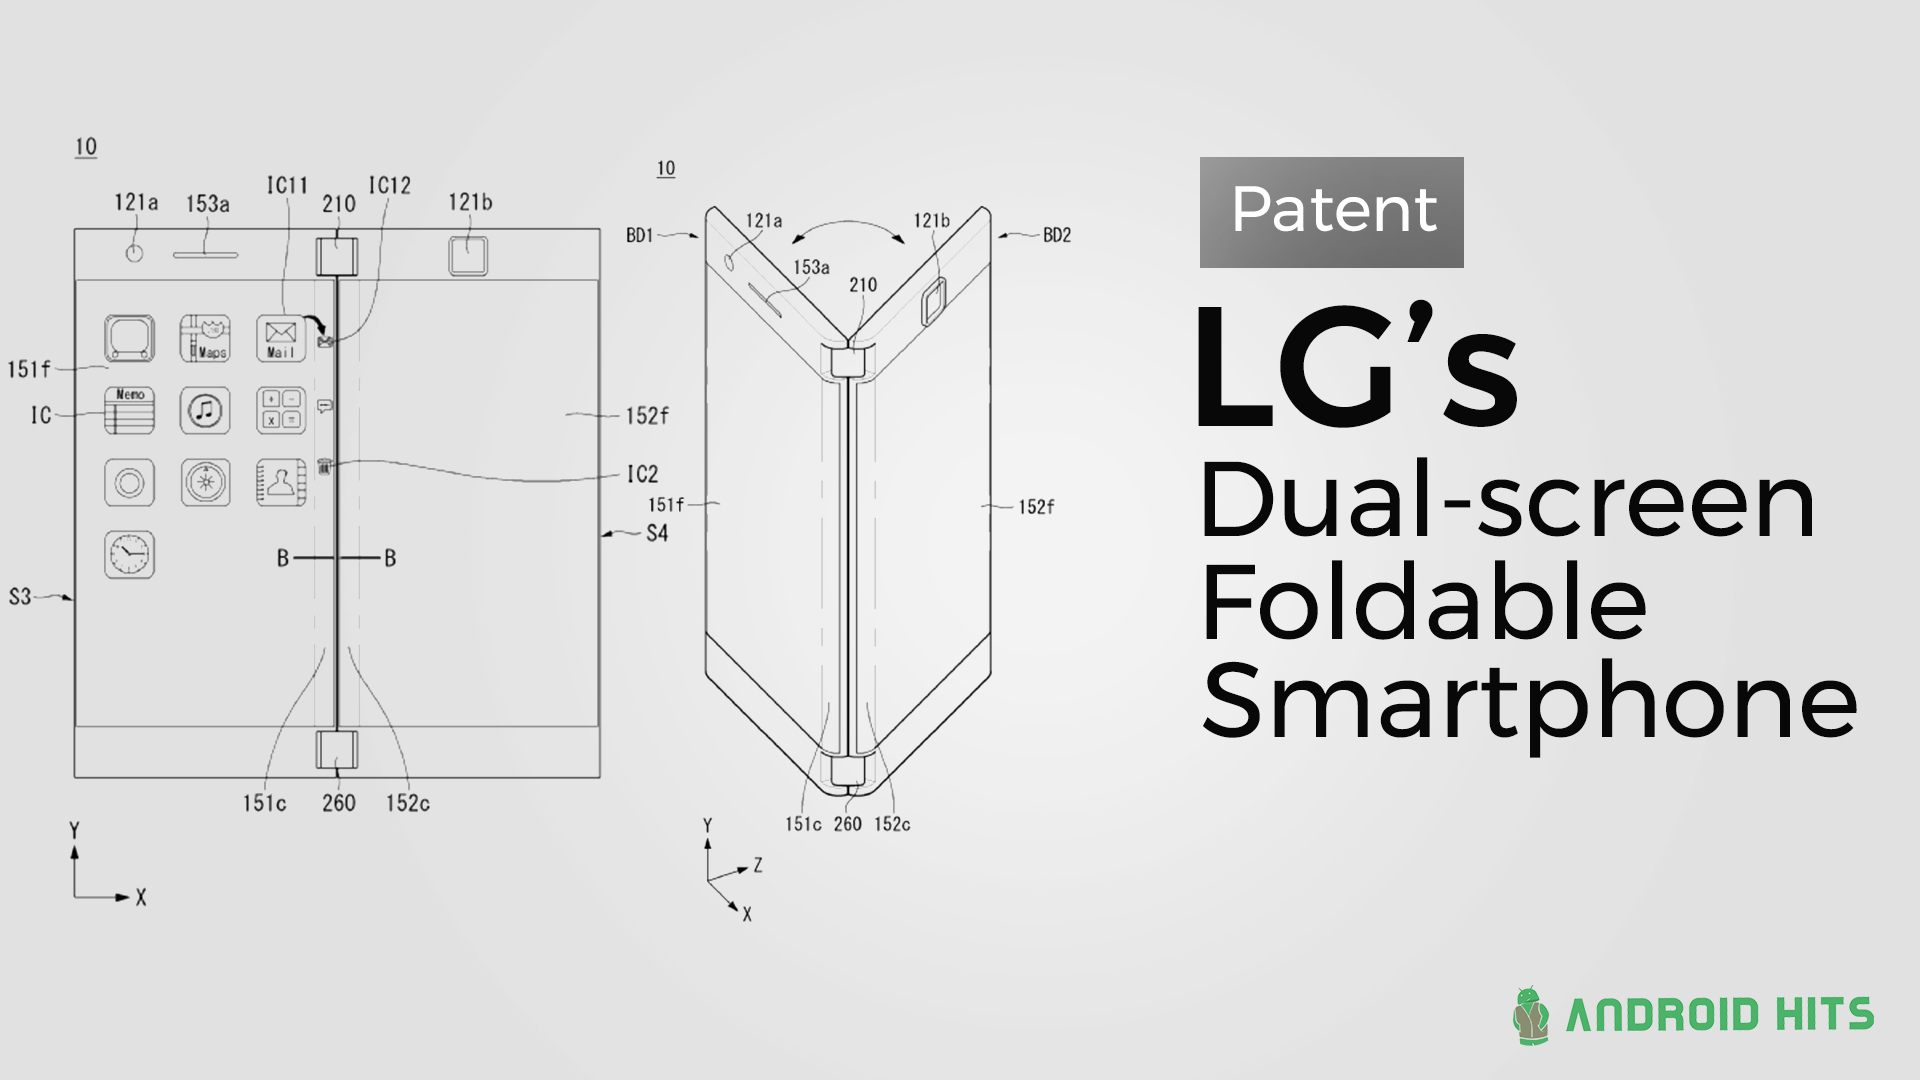 Patent shows LG's dual-screen foldable smartphone 1